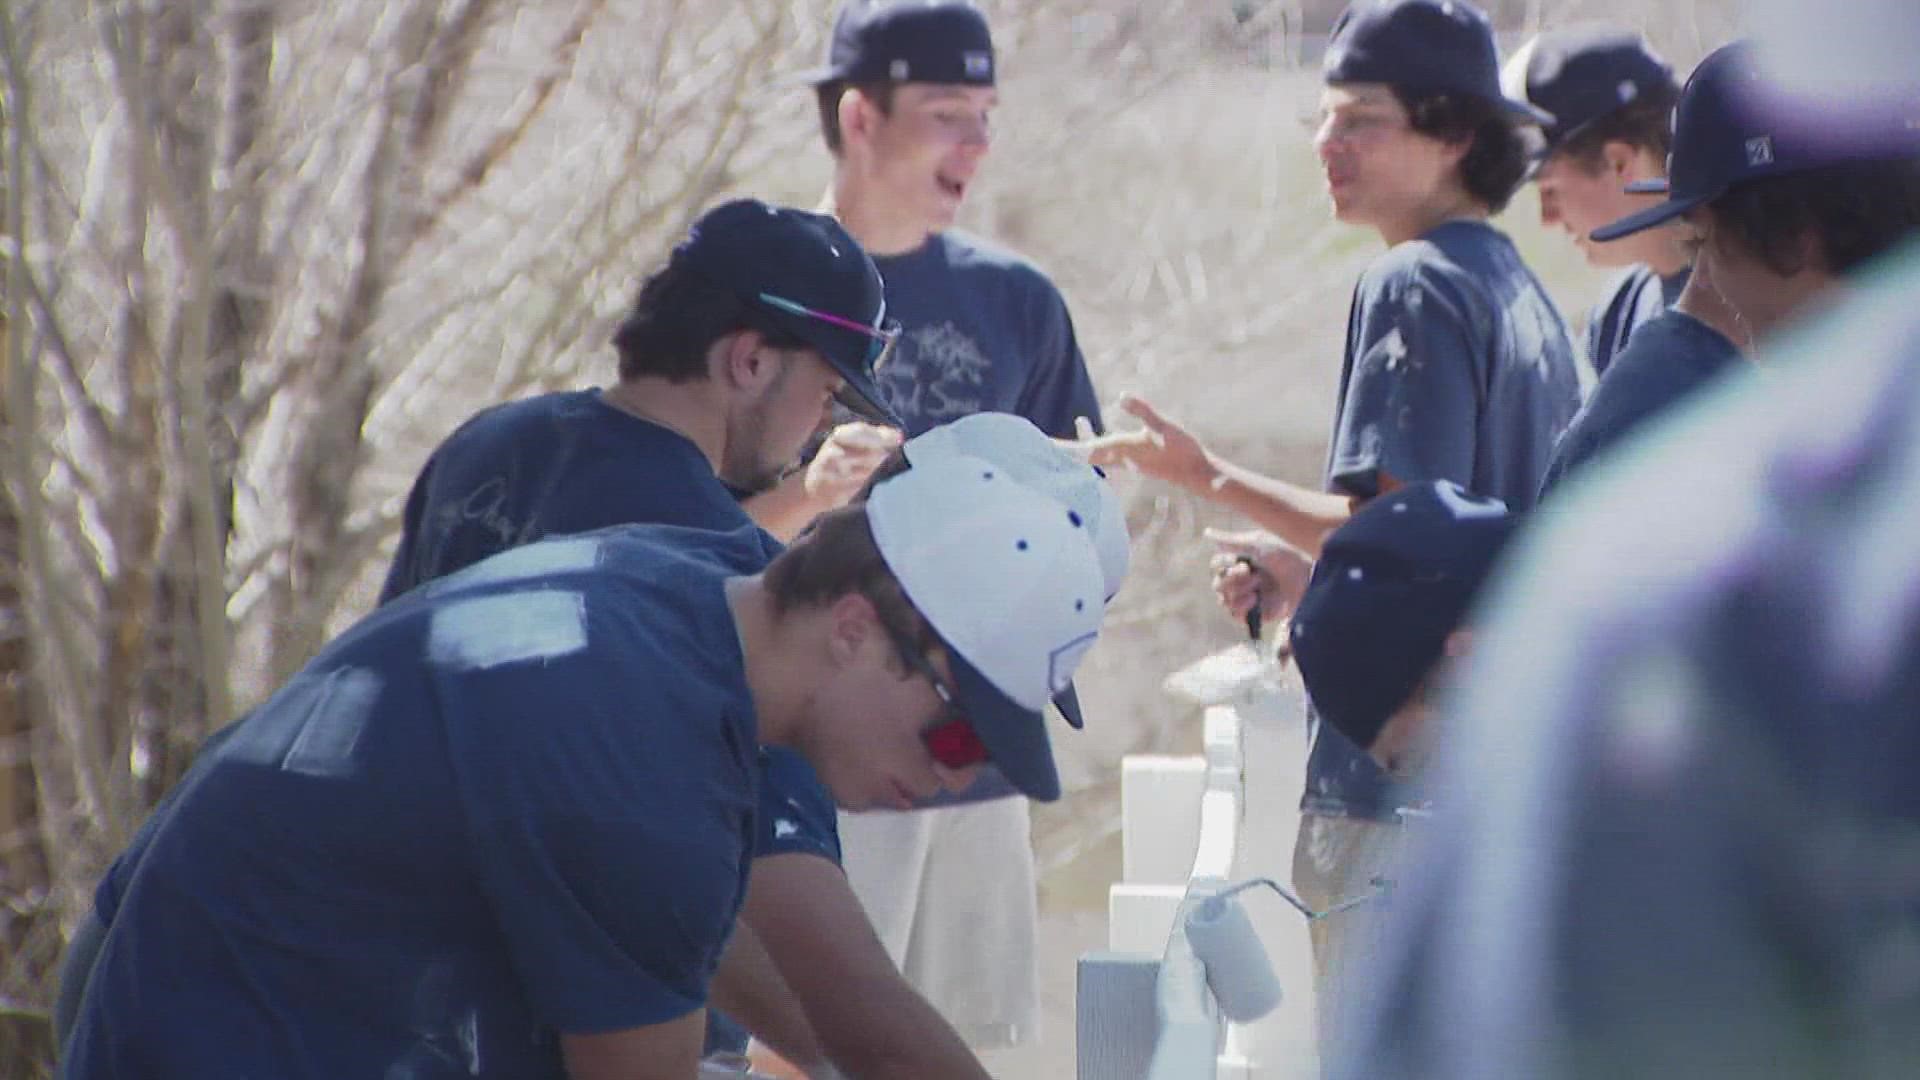 The Columbine High School baseball team used their day of service in remembrance of the shooting 23 years ago to help the Mountain Vista Senior Living Community.